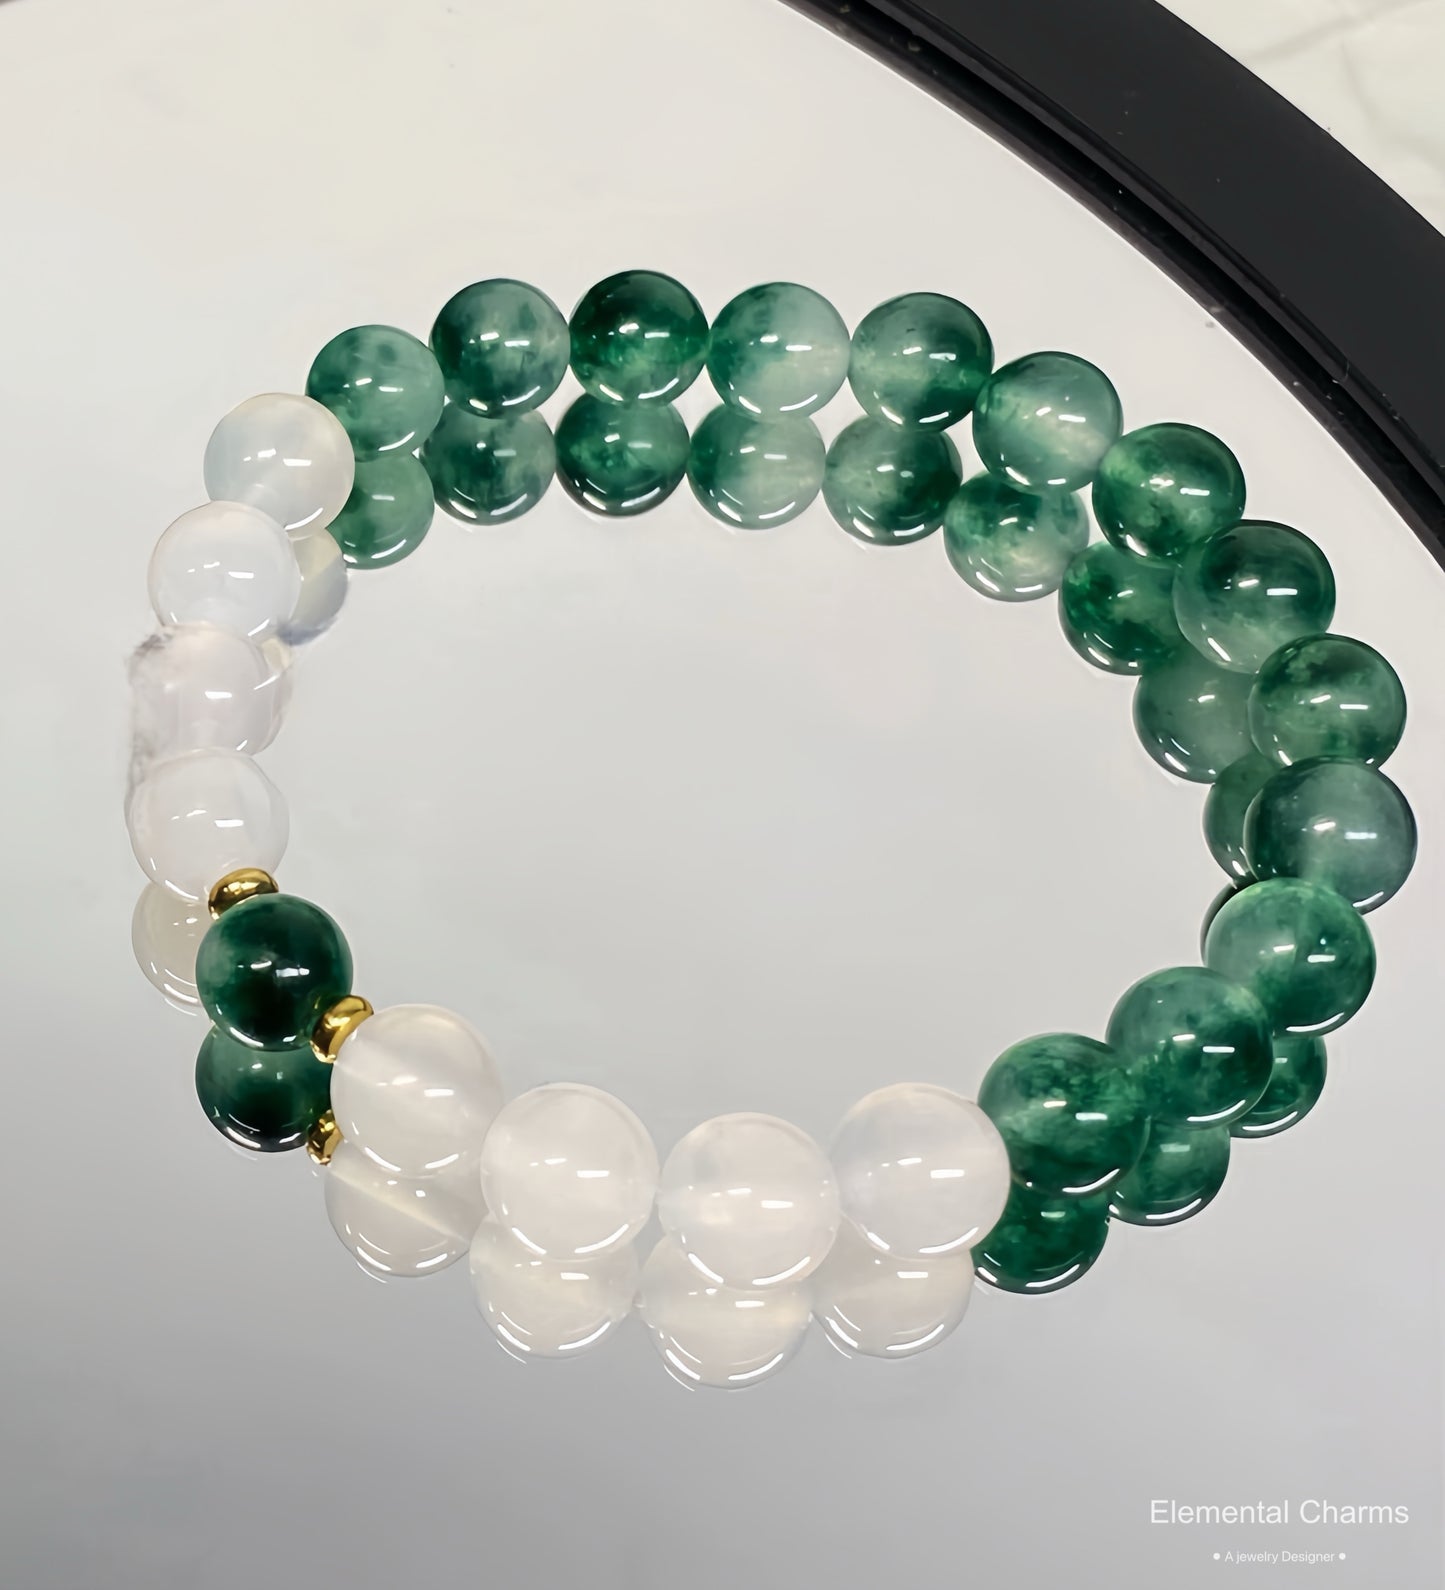 Natural Stone Jade Anxiety Relief Bracelet - Strength, Courage, and Mindfulness Gift